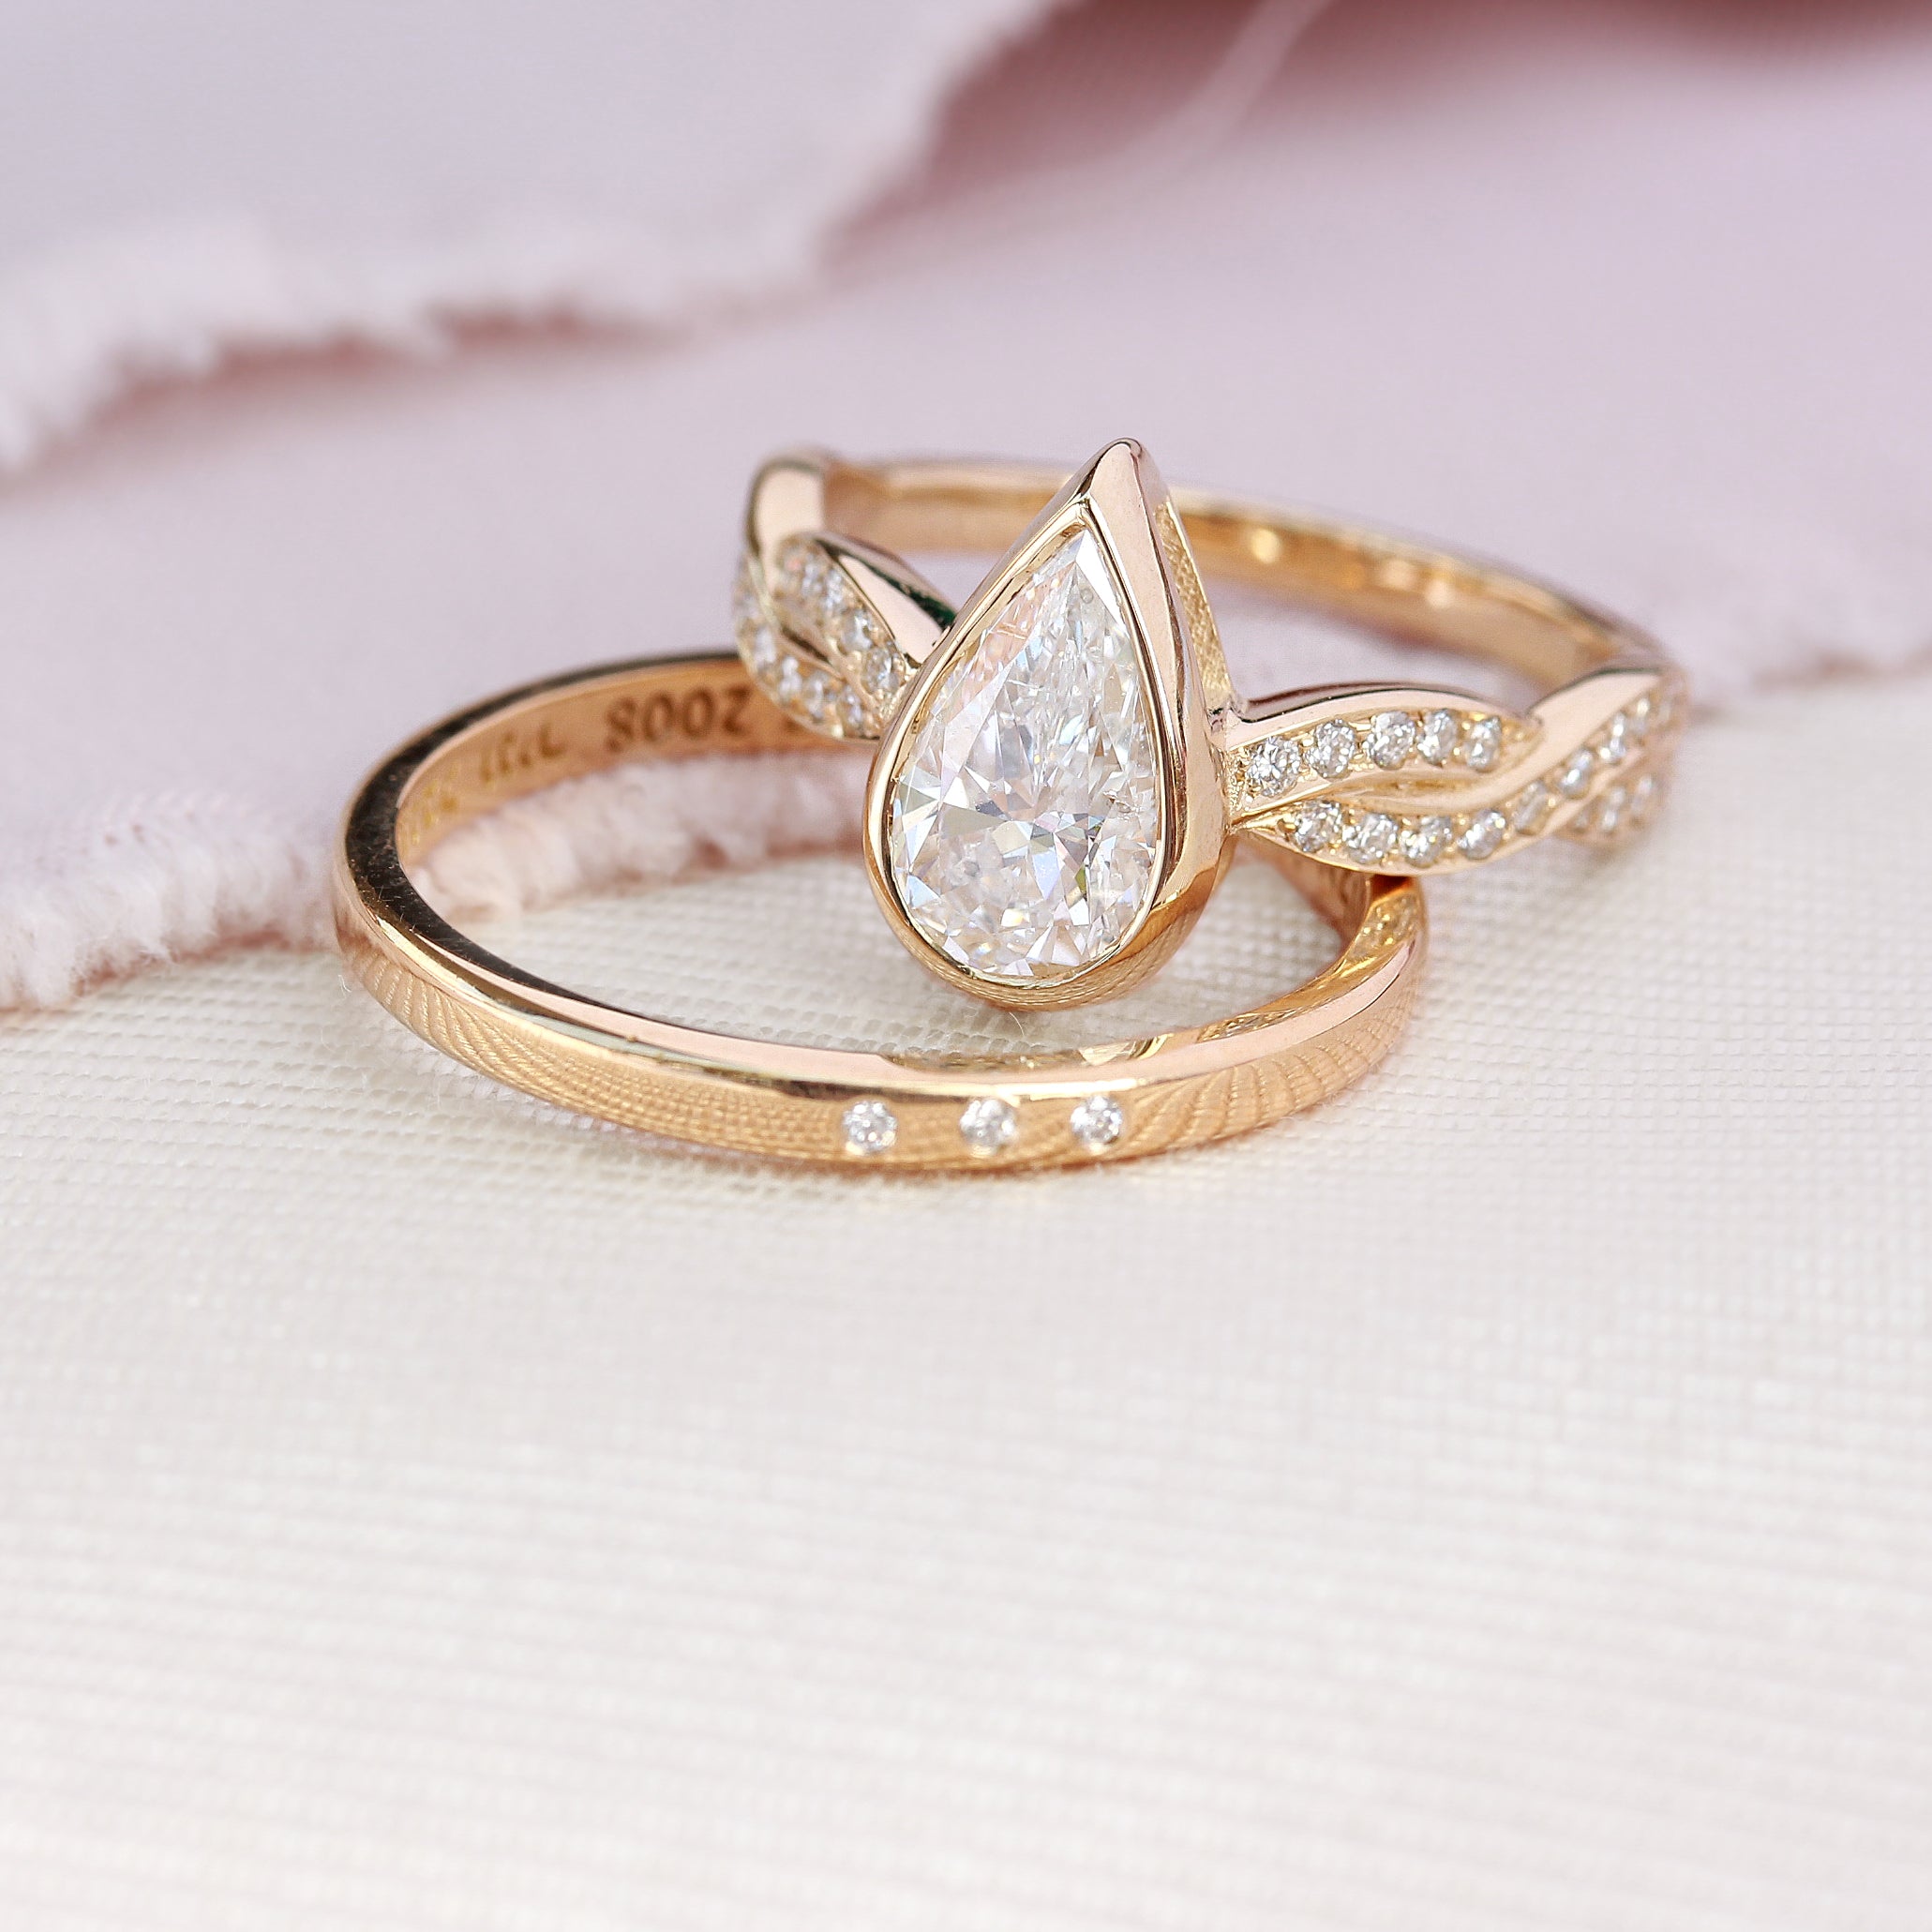 Pear Diamond Bezel Engagement Ring "Dragonfly" with "Iceland" ring guard enhancer ♥